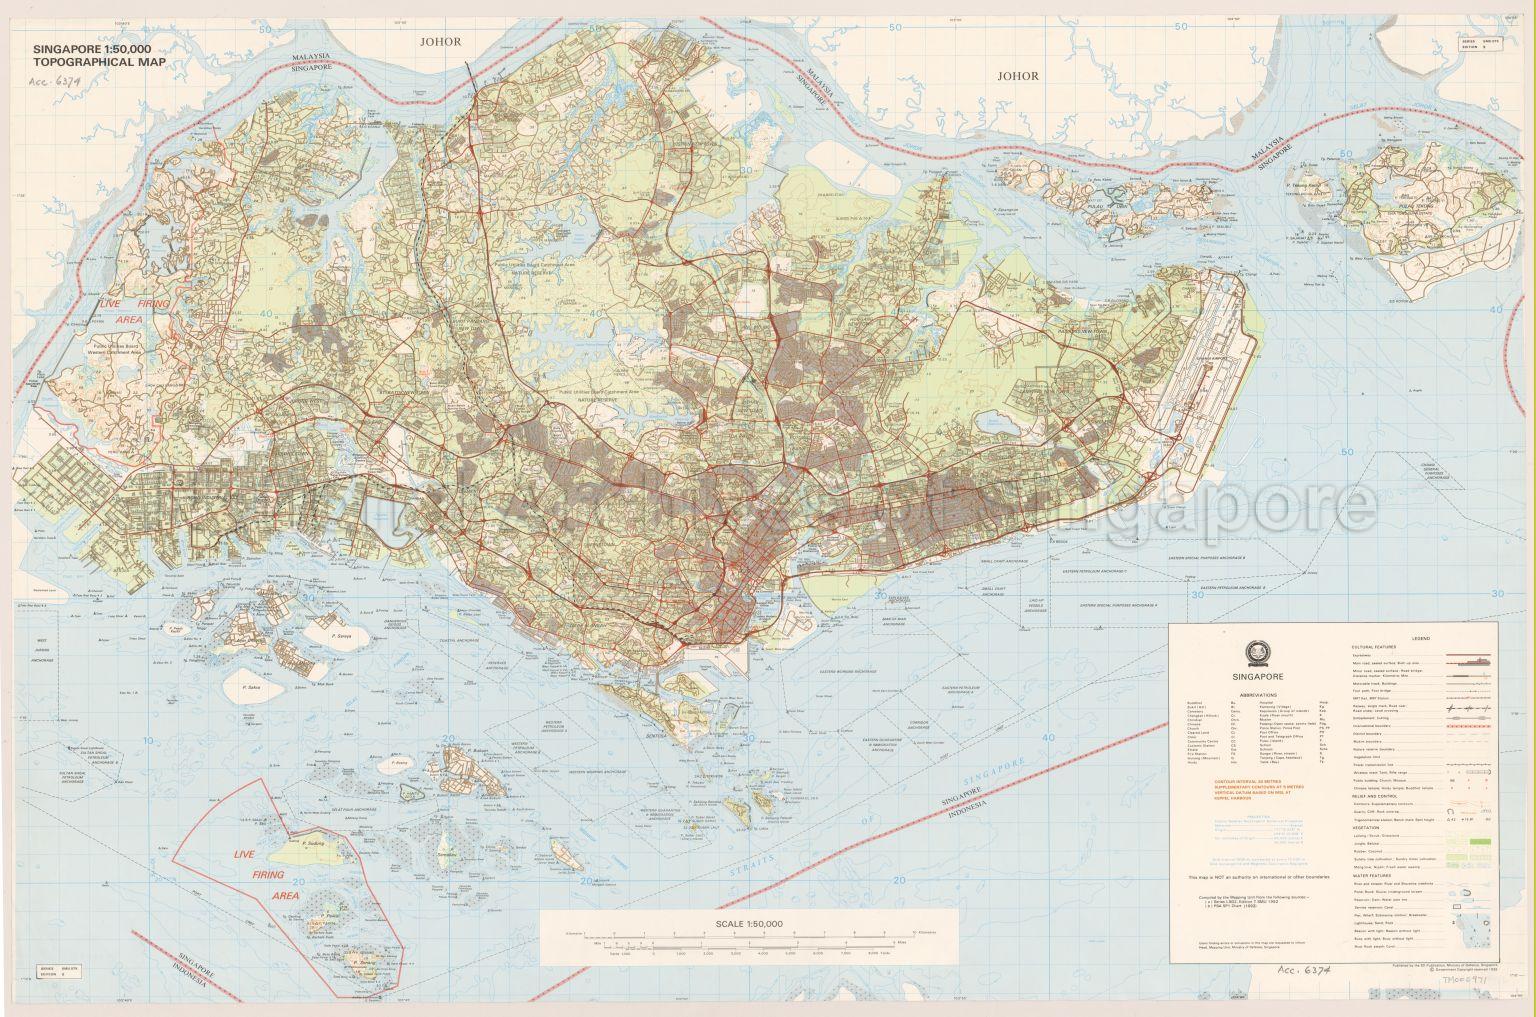 Singapore Topographical Map